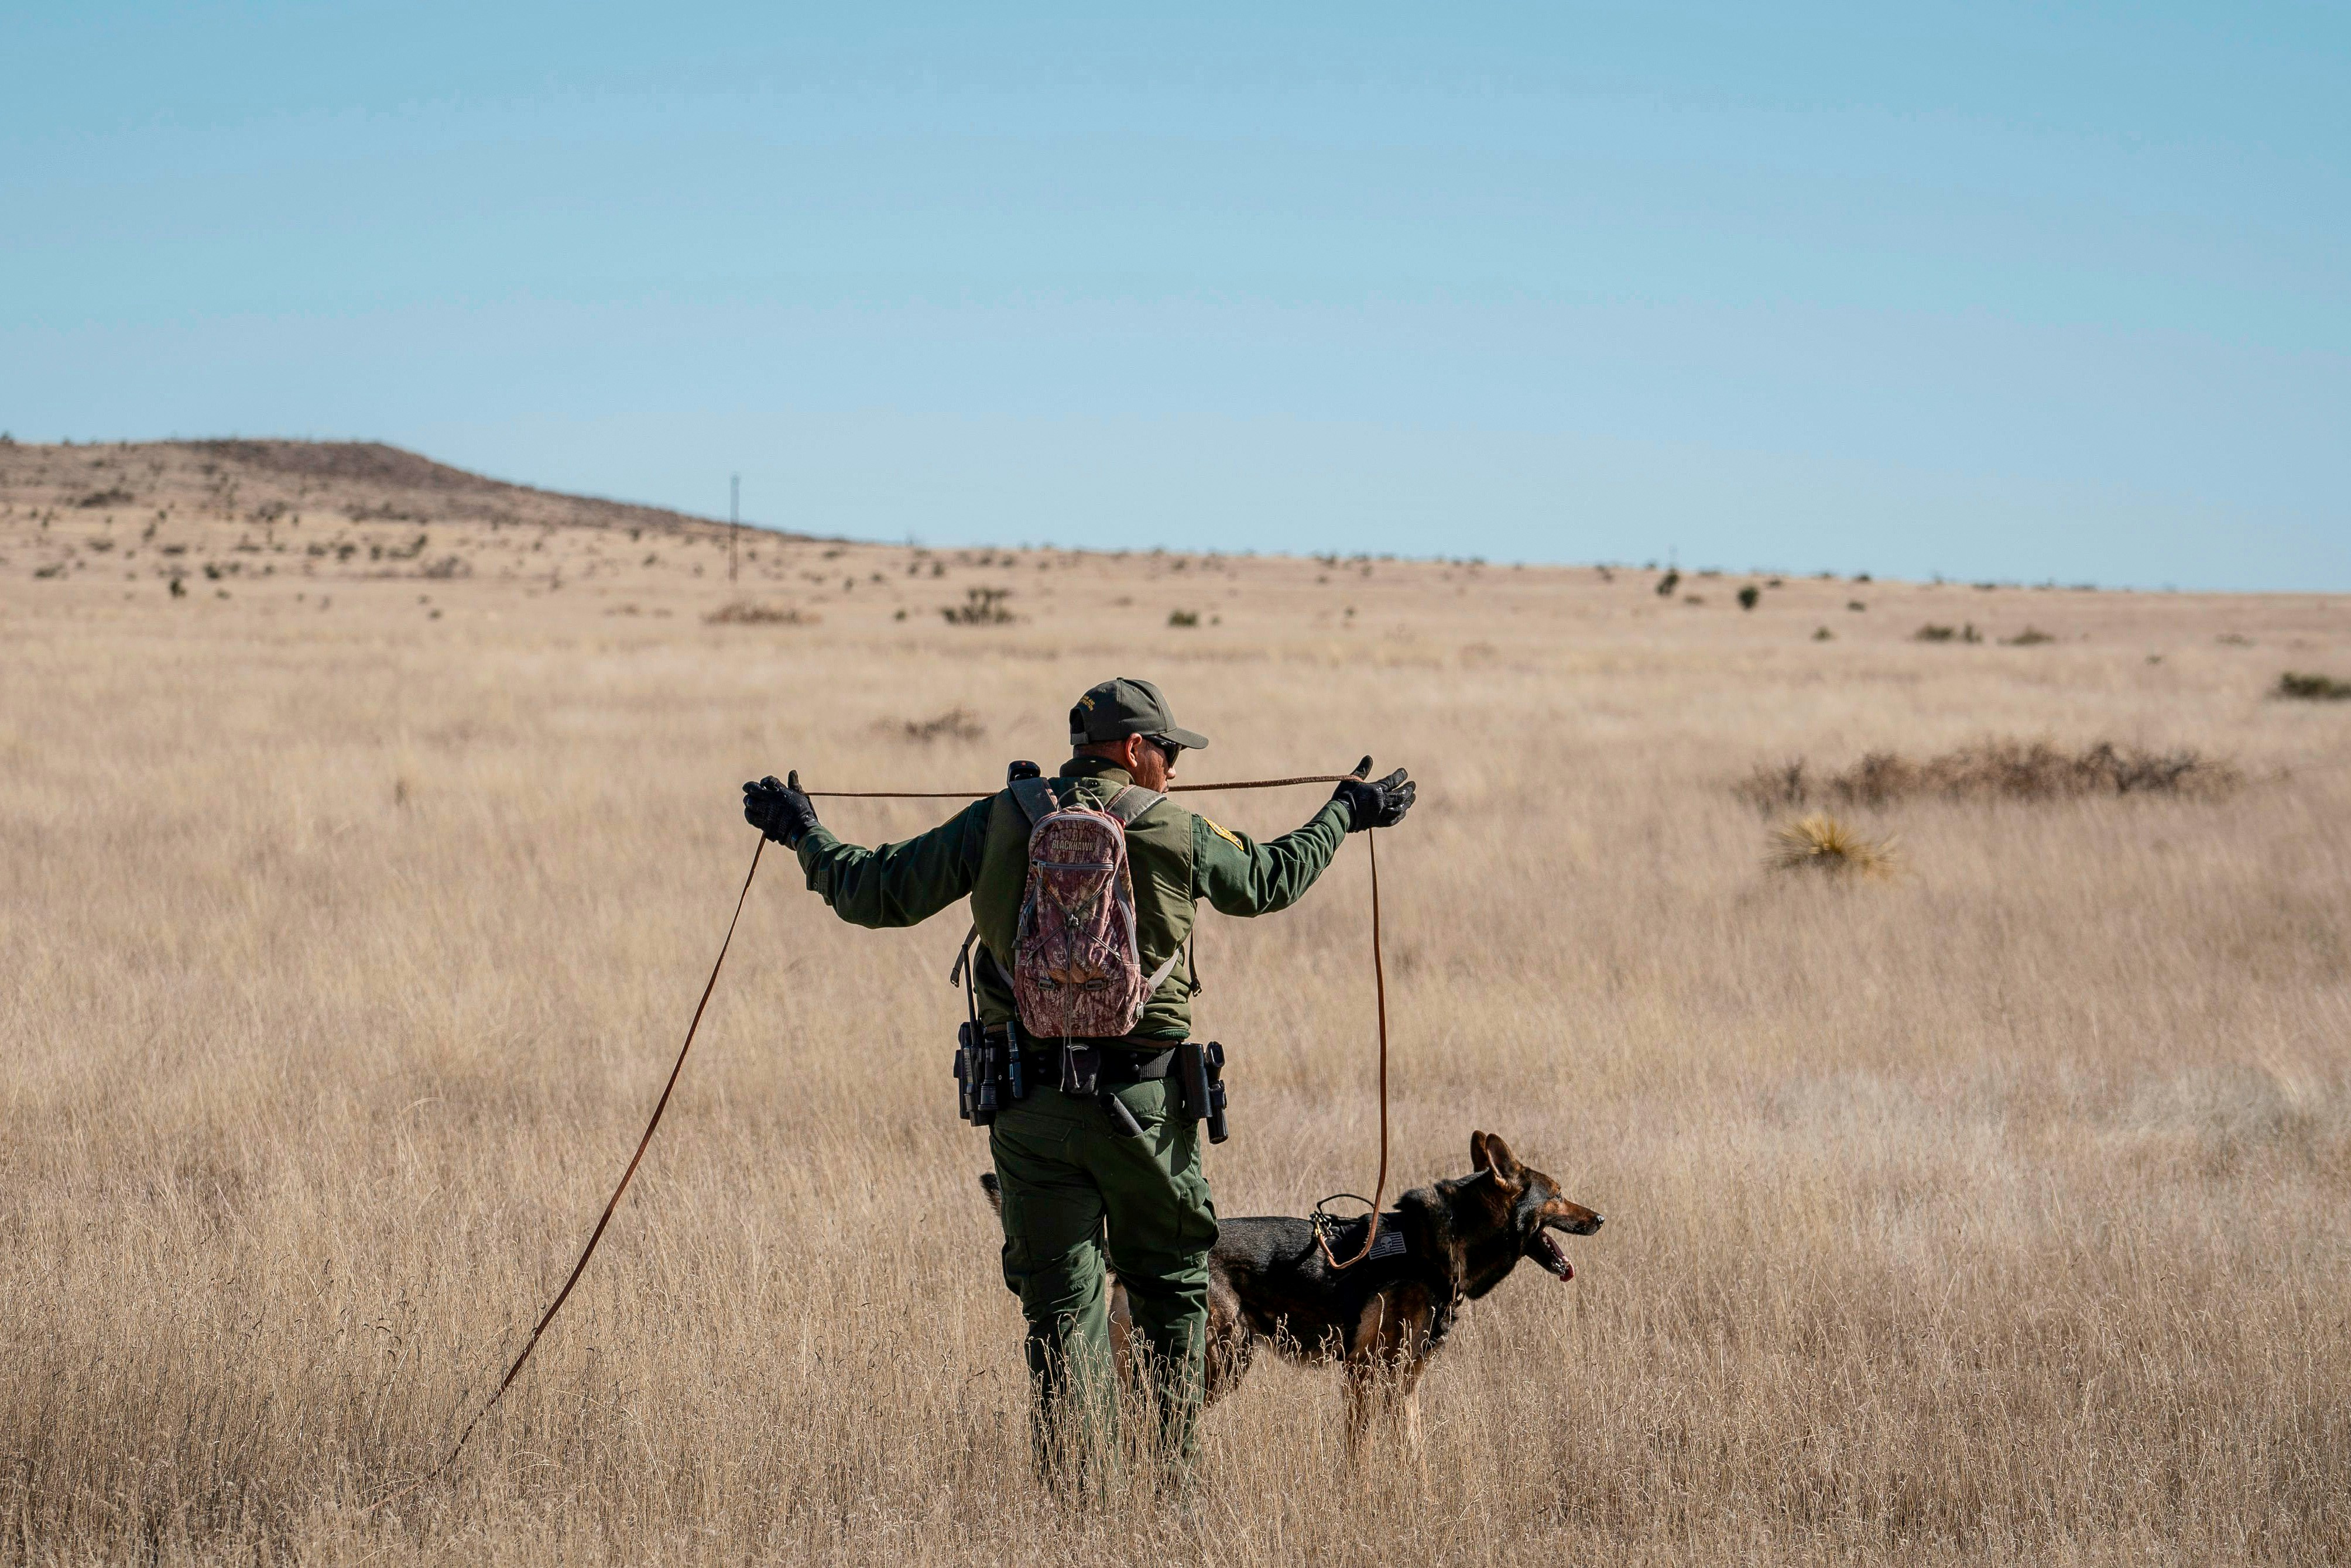 Canine Handler Agent Jose Solis, looks for the trail of suspects with his dog Max, a Belgian Malinois, Marfa, Texas on January 29, 2020. - Agents in the Big Bend Border Patrol Sector employ tracking techniques and spend a lot of time on foot and on horseback to pursue smugglers, and drug or human traffickers through the remote terrain of West Texas. (Photo by Paul Ratje / AFP) (Photo by PAUL RATJE/AFP via Getty Images)